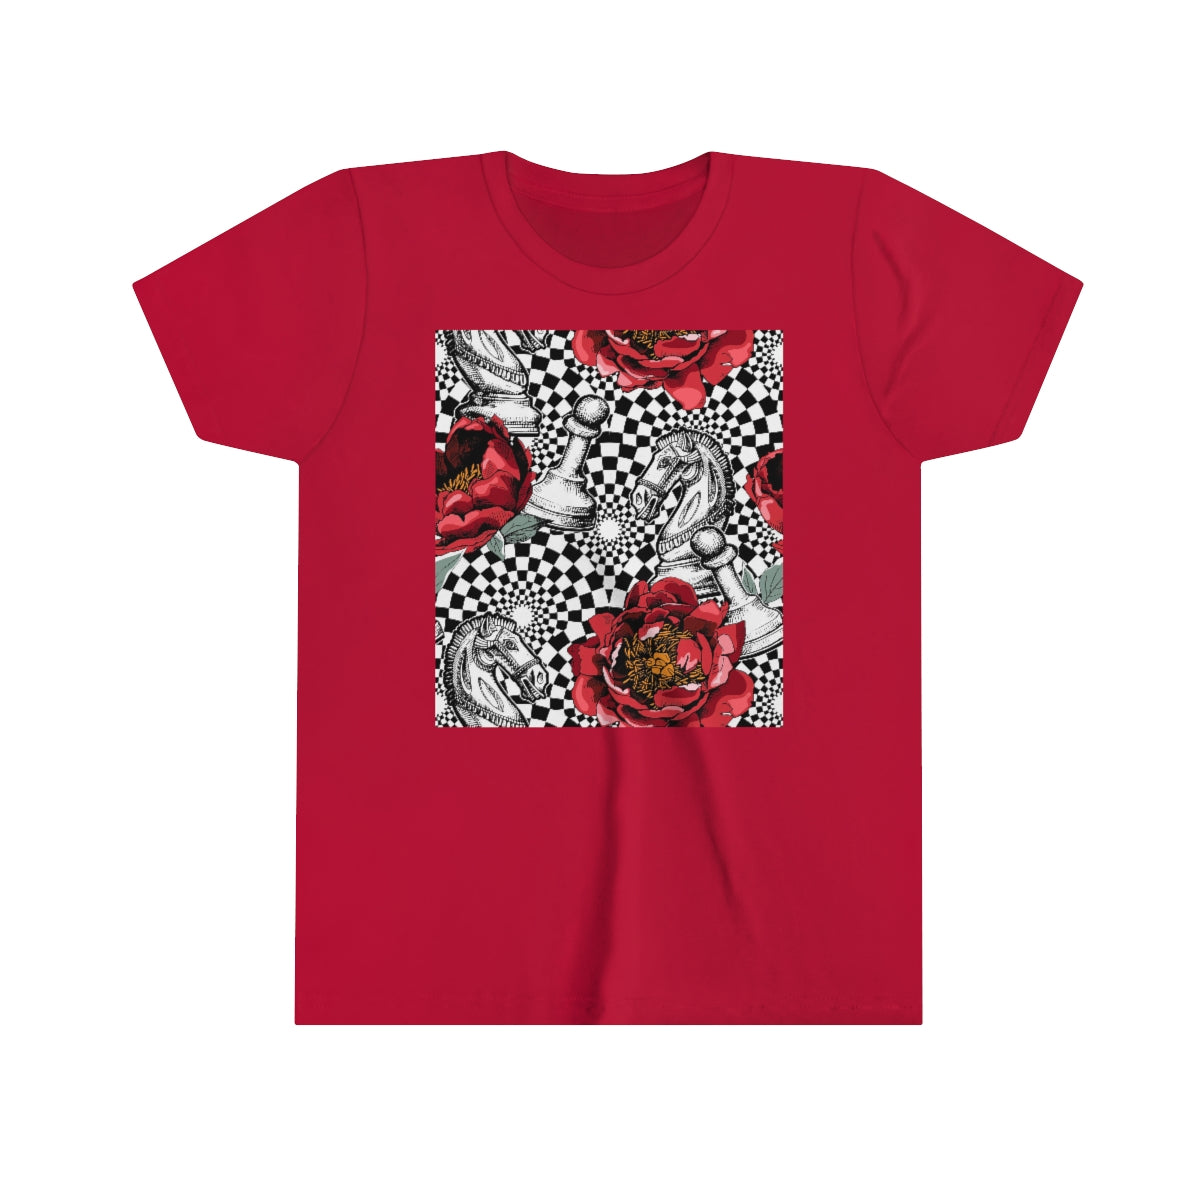 Youth Short Sleeve Tee "Optical illusion Chess & flowers"